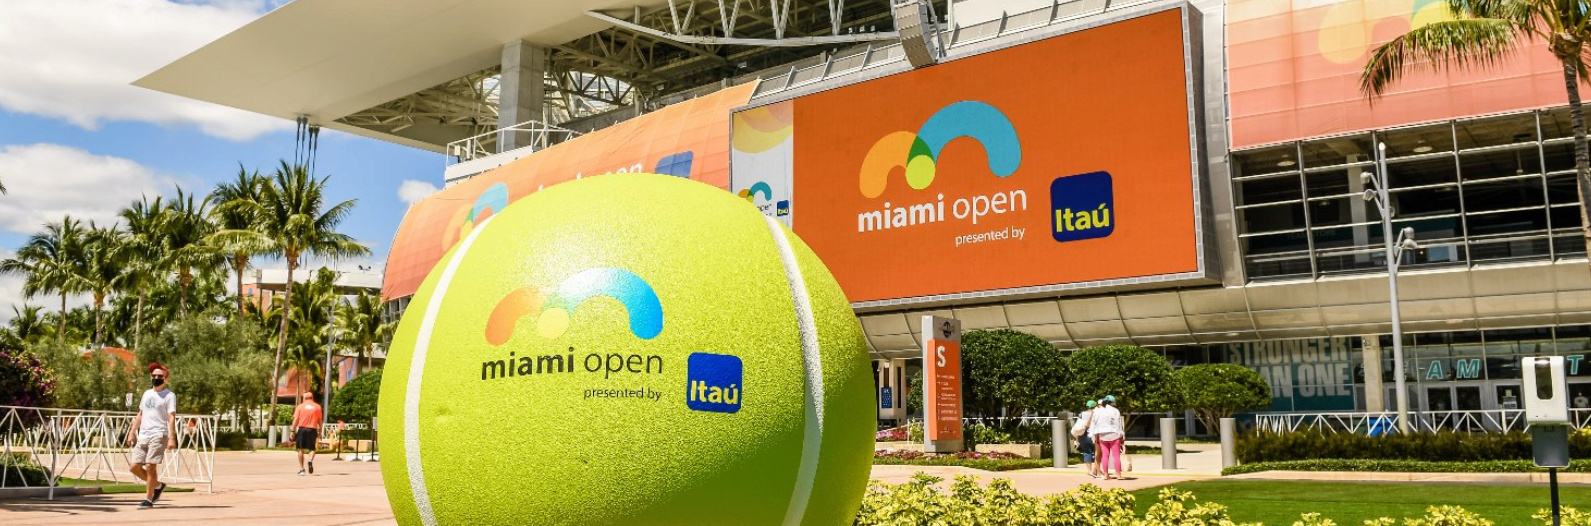 Masters 1000 - March 2023: Indian Wells & Miami Open  - Page 2 Miami_40